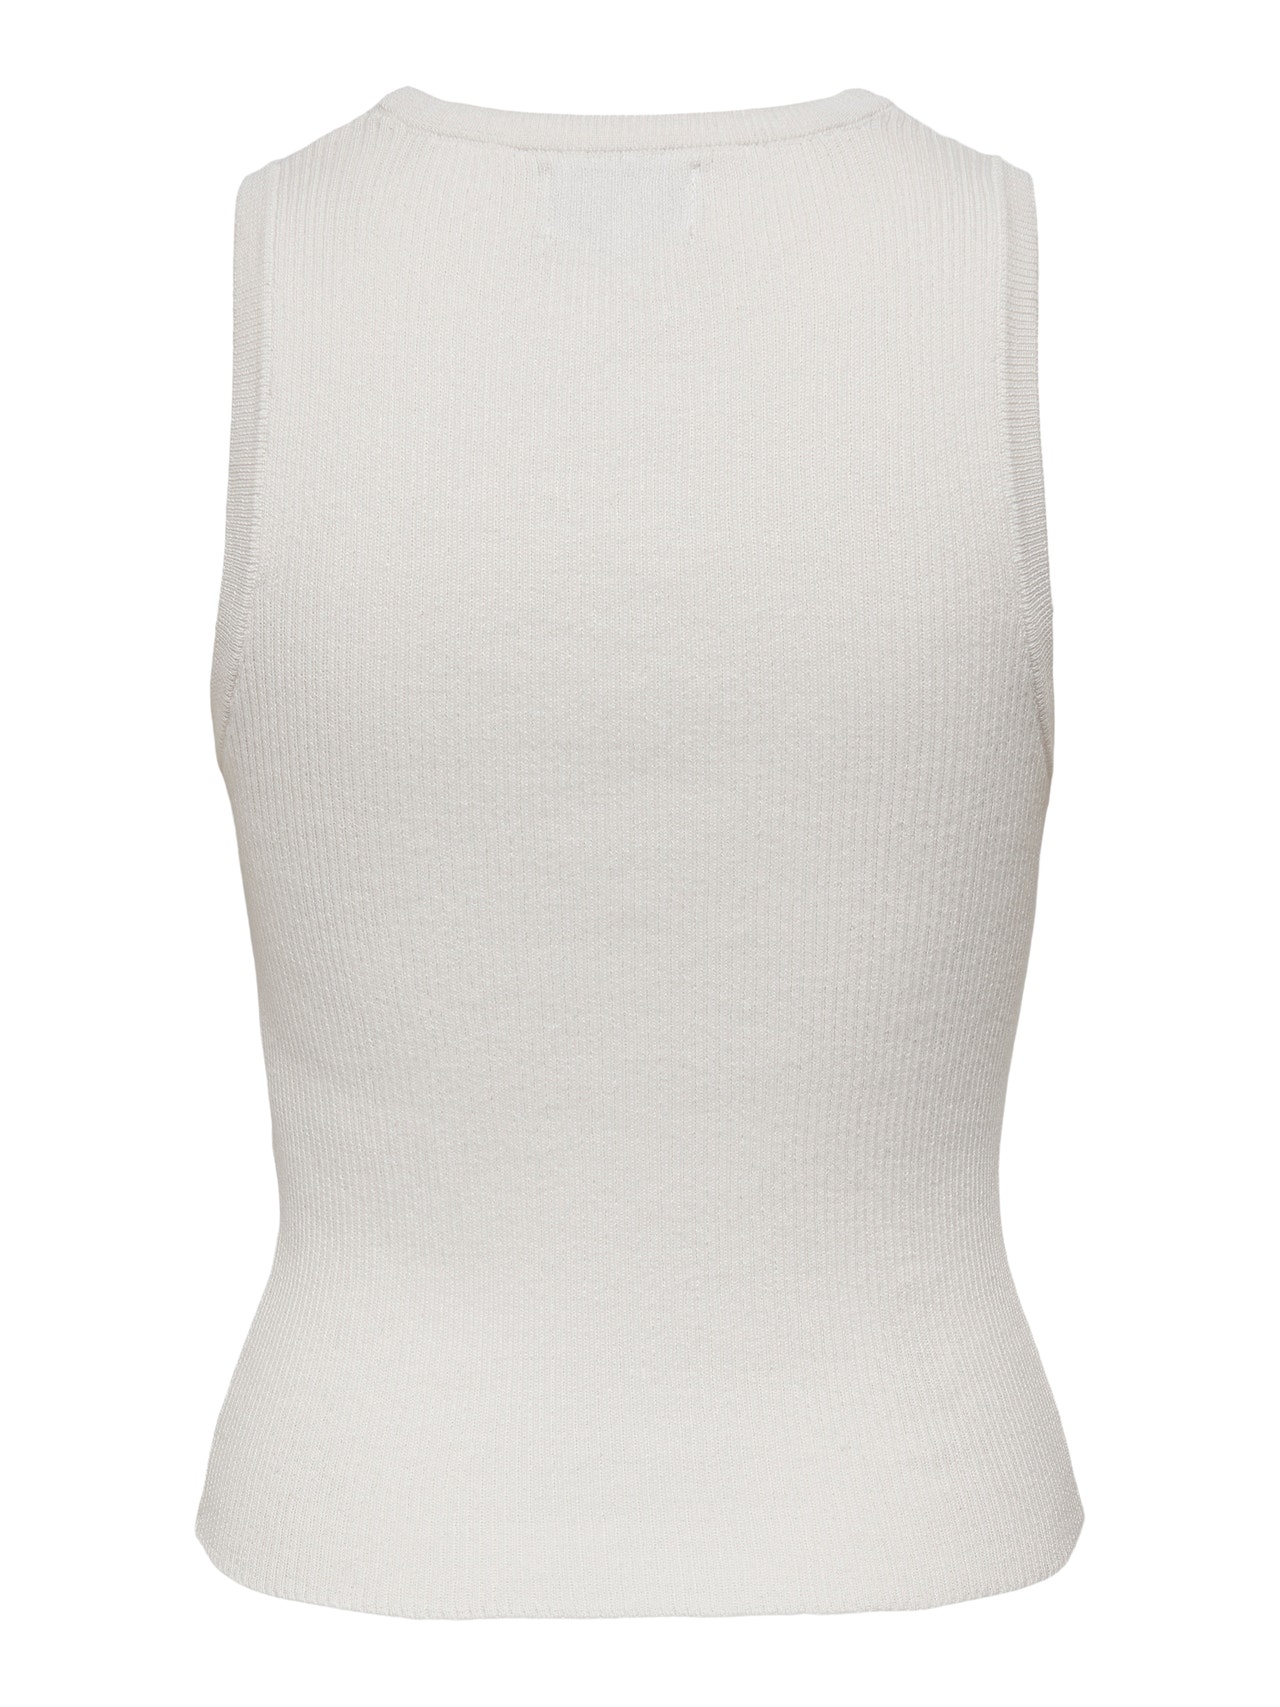 ONLY Sleeveless Knitted Top -Cloud Dancer - 15251272